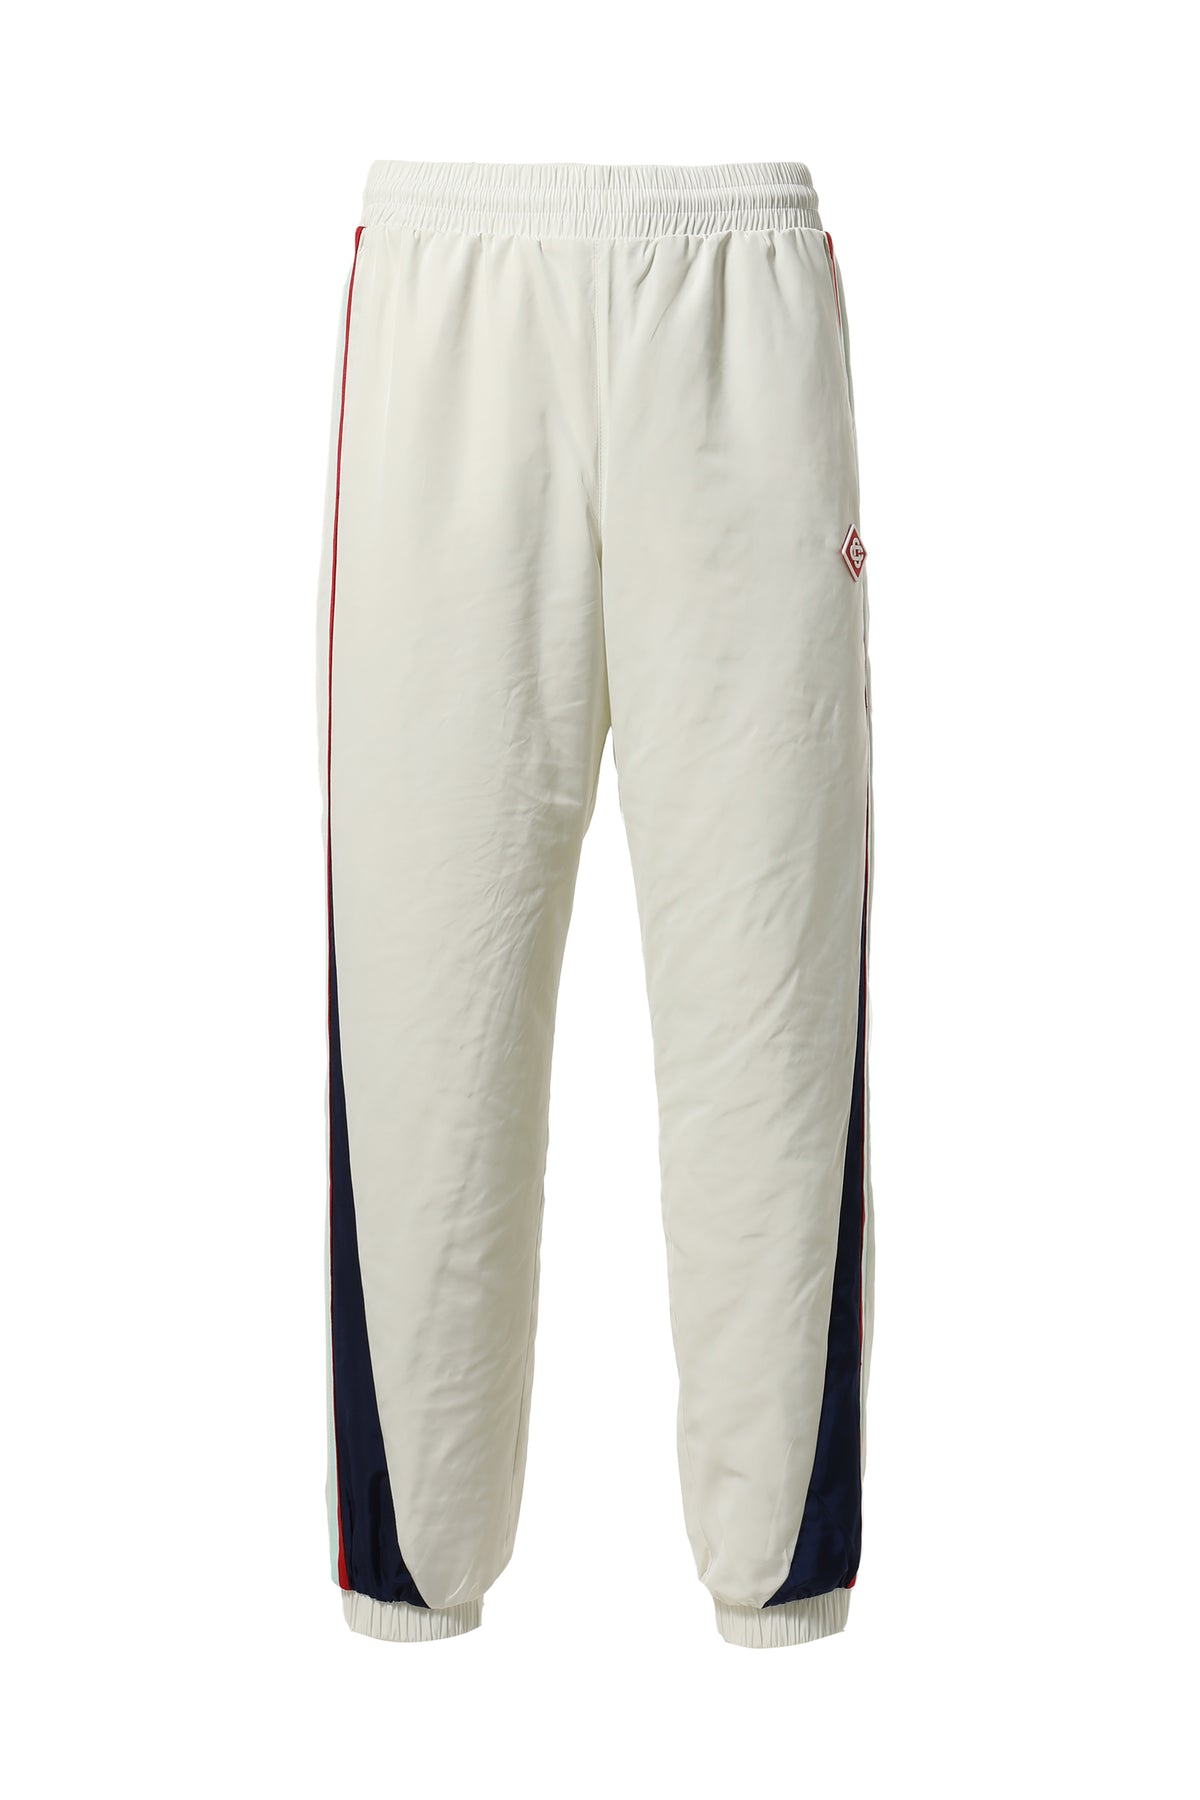 Casablanca SIDE PANELLED SHELL SUIT TRACK PANT / WHT